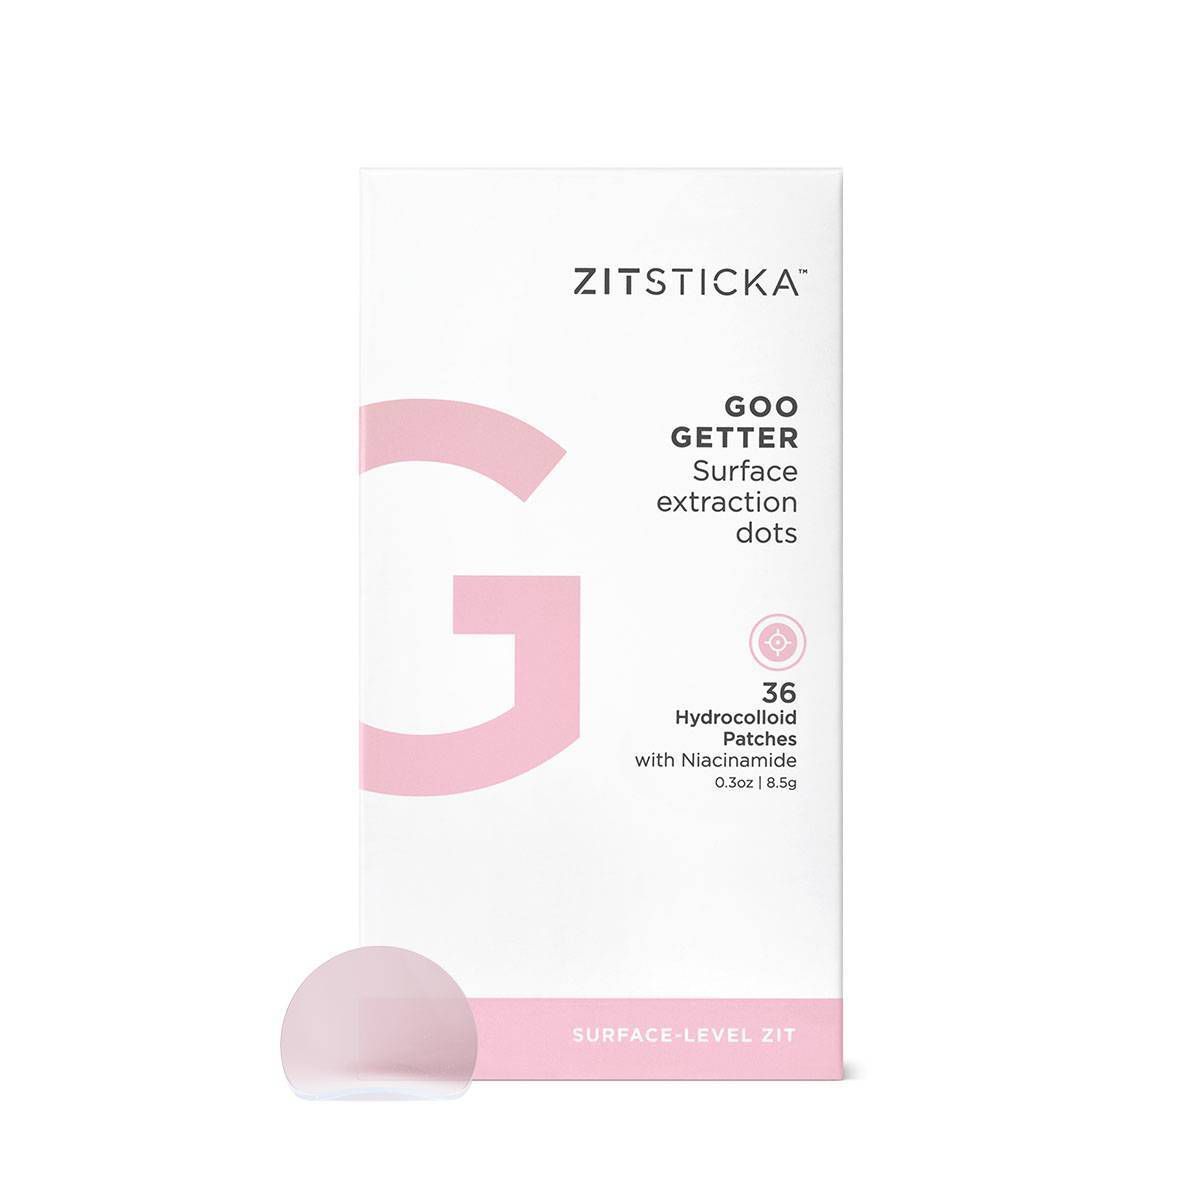 ZitSticka Goo Getter Surface Pimple Hydrocolloid Patch - 36ct | Target